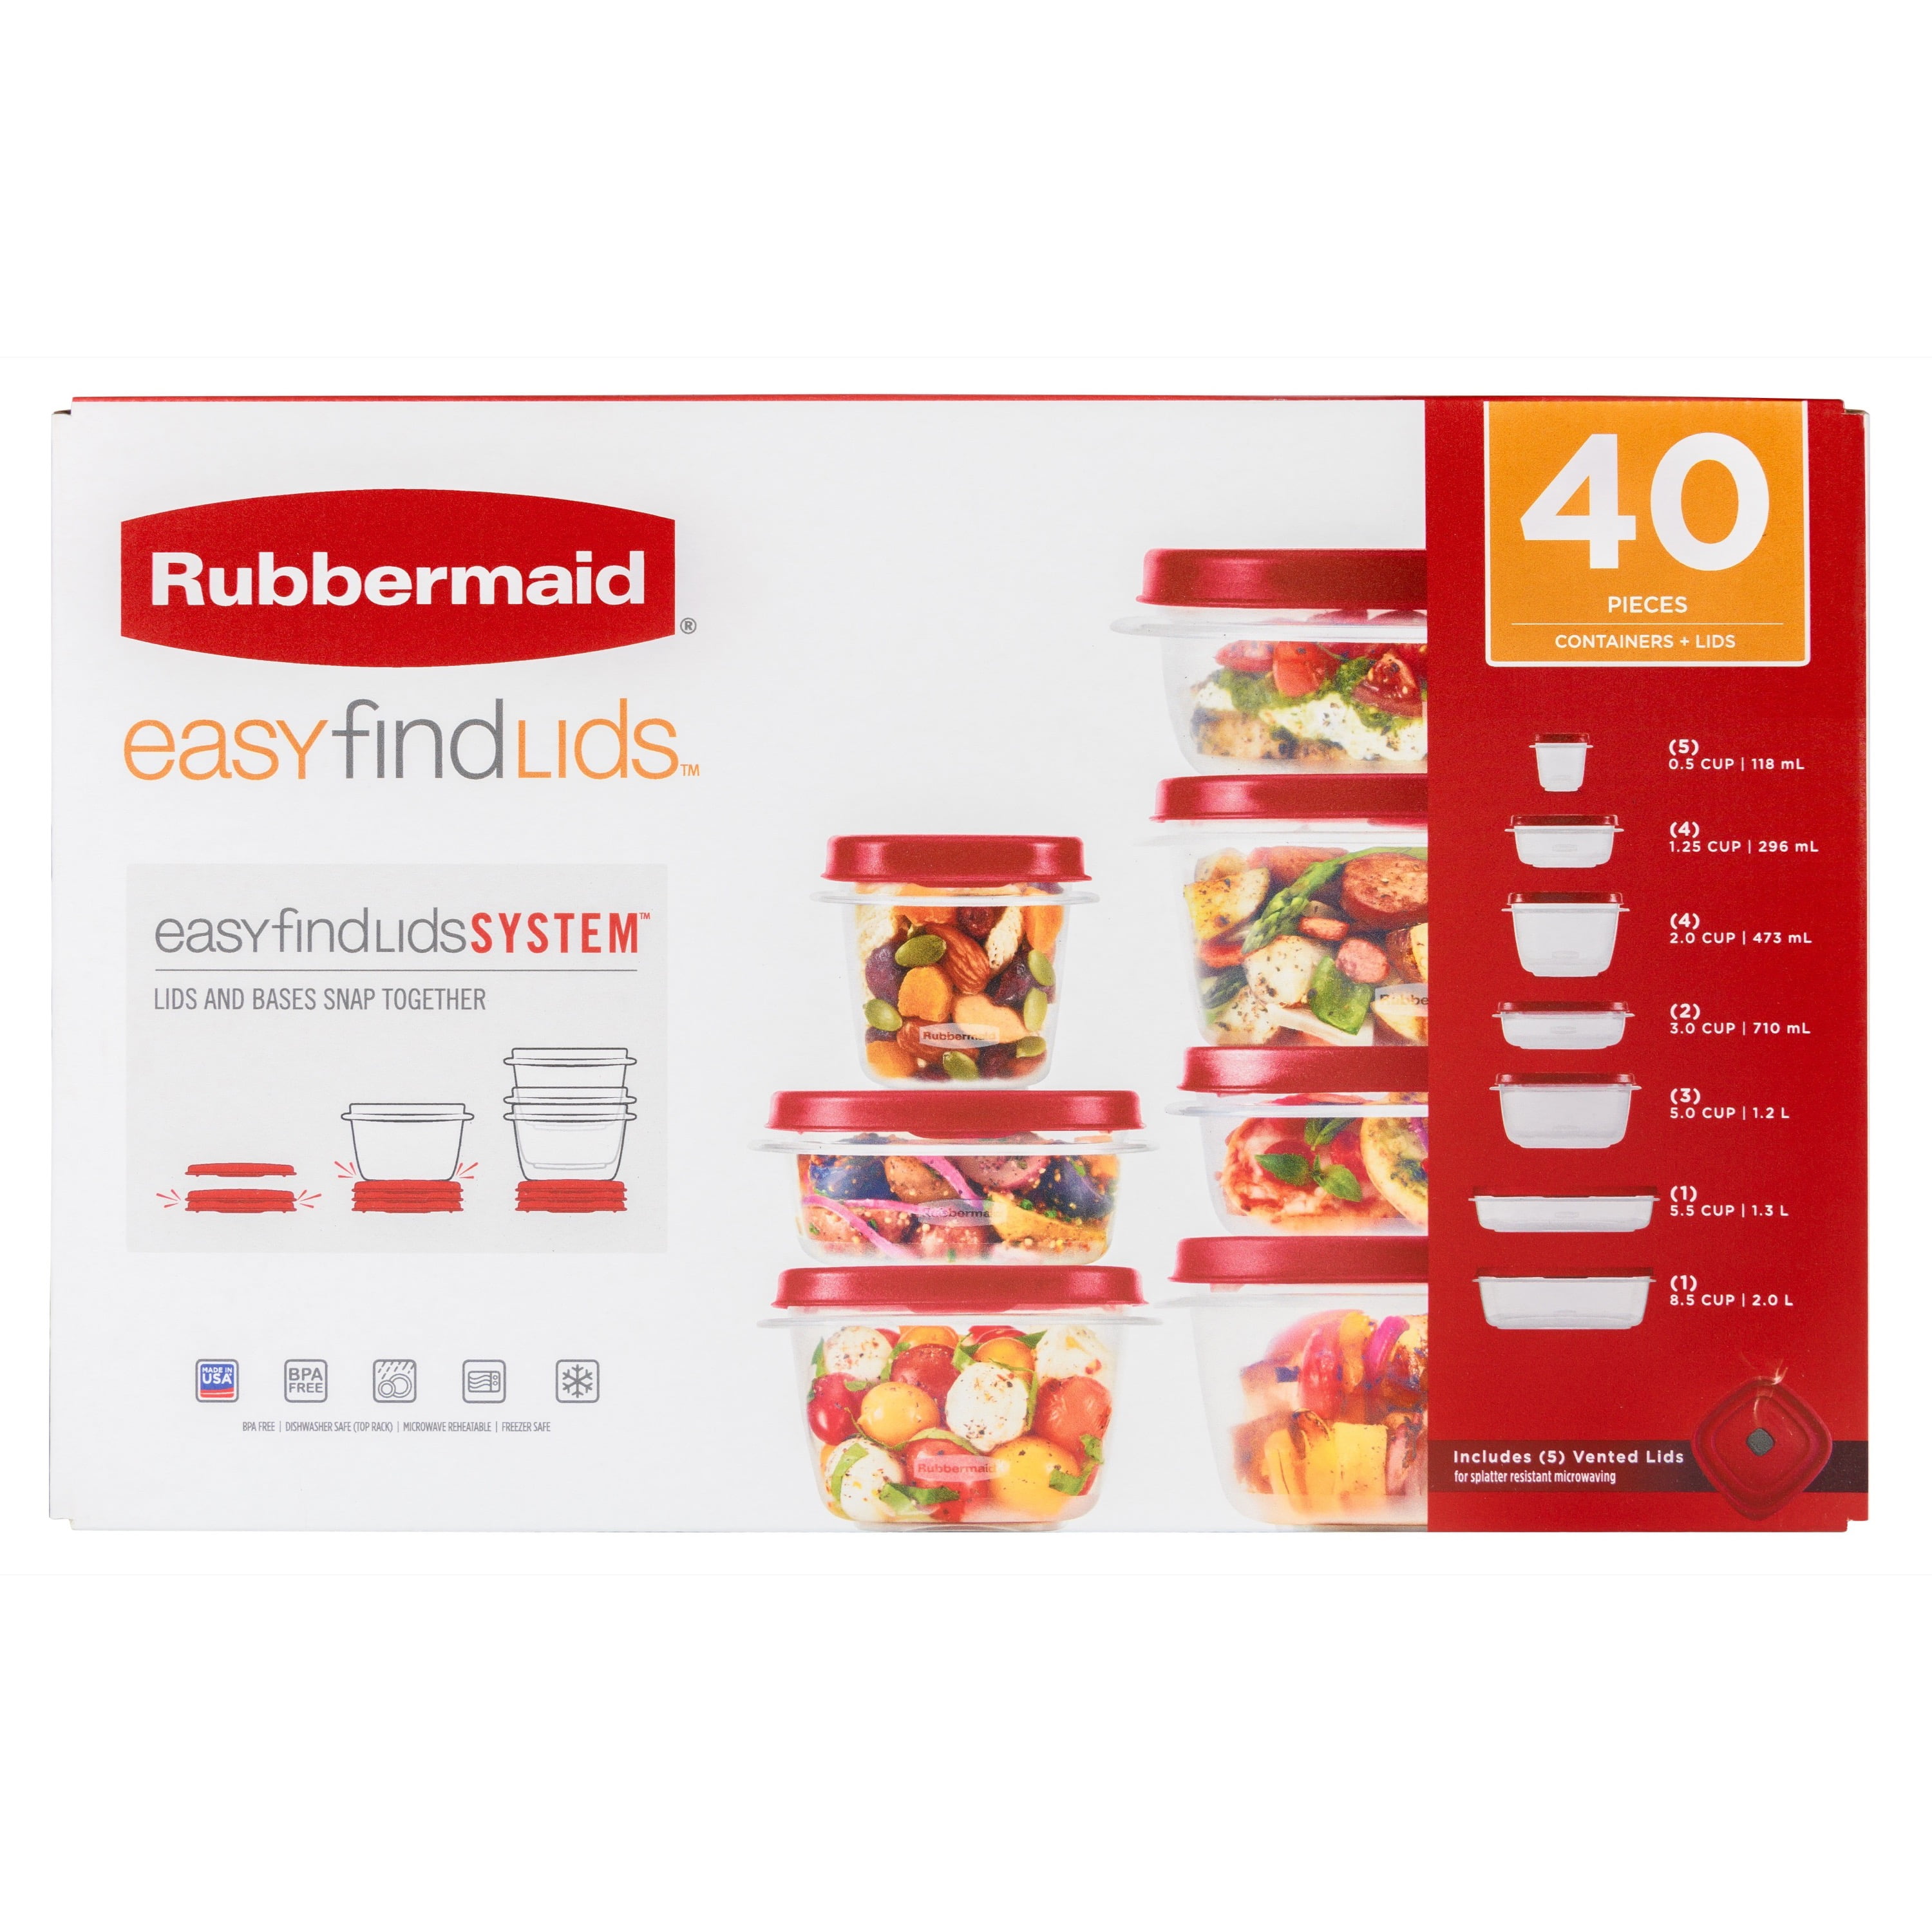 Rubbermaid storage: Save 64% on these top-rated food containers